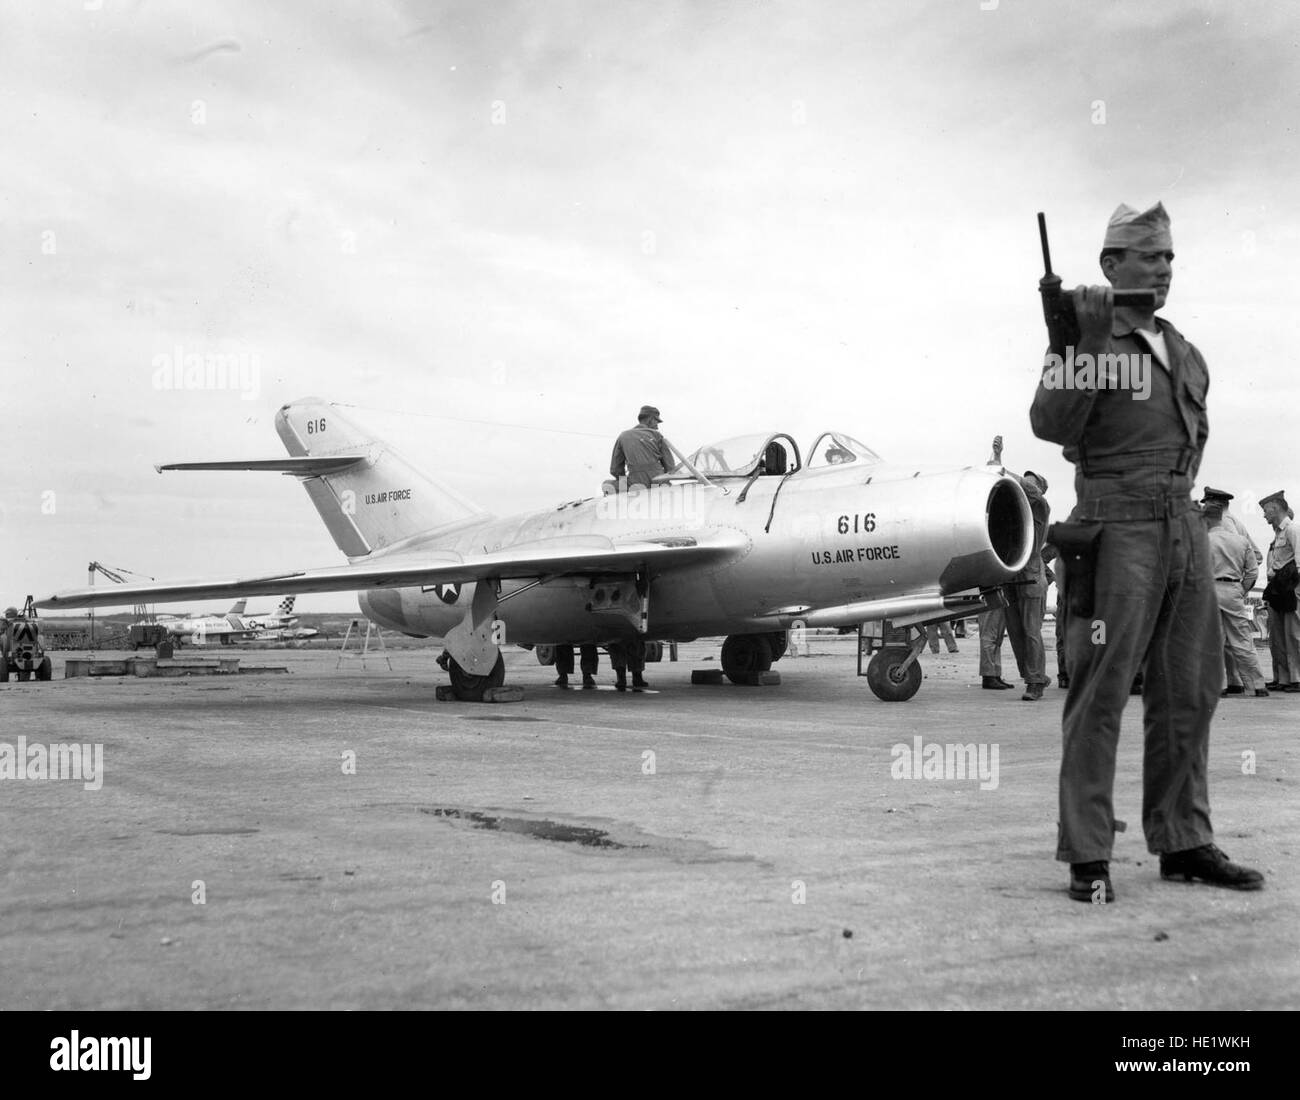 Under constant guard by Air Police at a U.S. Air Force installation on Okinawa, reassembly of the MIG-15 is completed on the flight line.   After careful ground testing, the Russian-built fighter was flown by five U.S. Air Force pilots during a week of extensive tests.  October 1953. Stock Photo